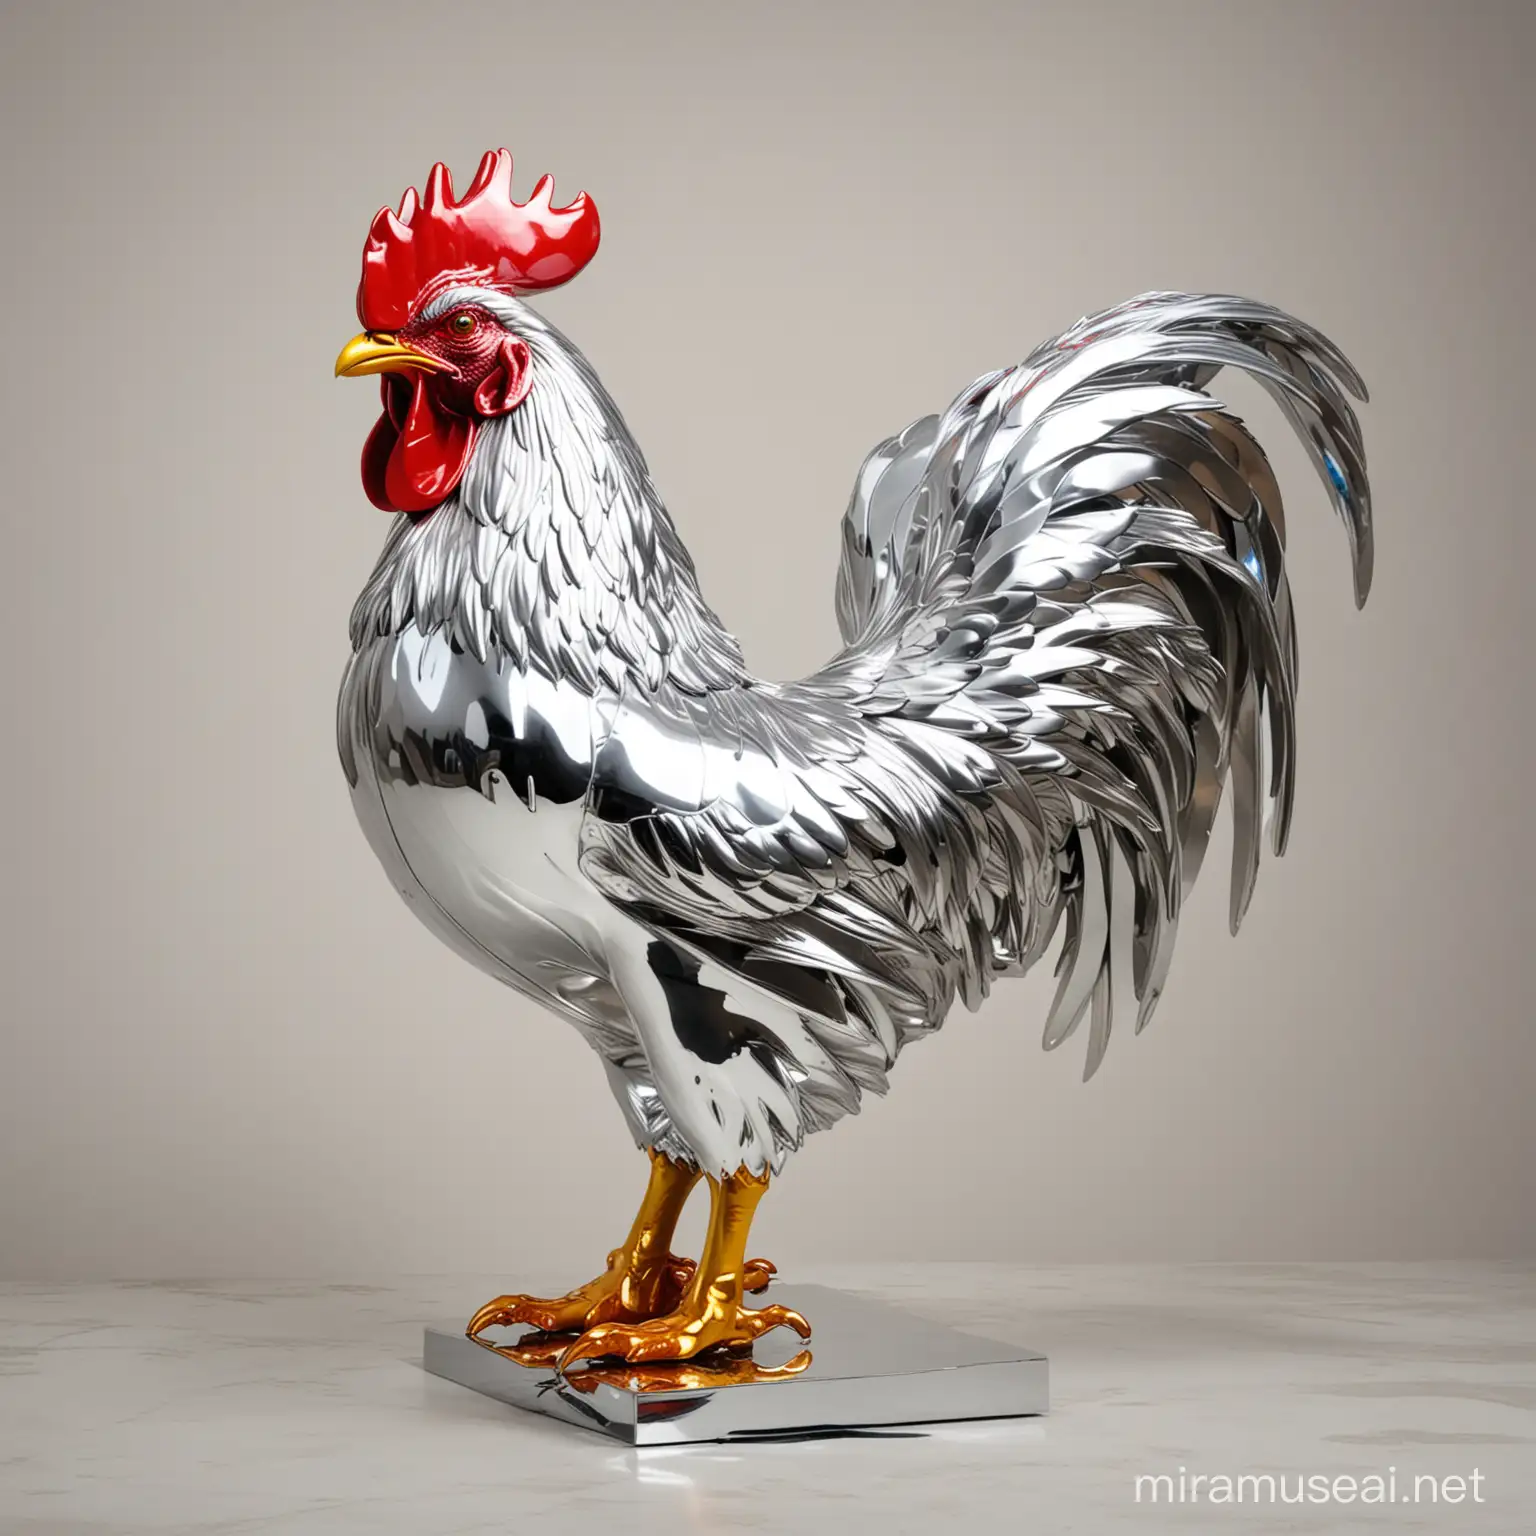 Metallic Rooster Sculpture in the Style of Jeff Koons with Dynamic Light Reflections